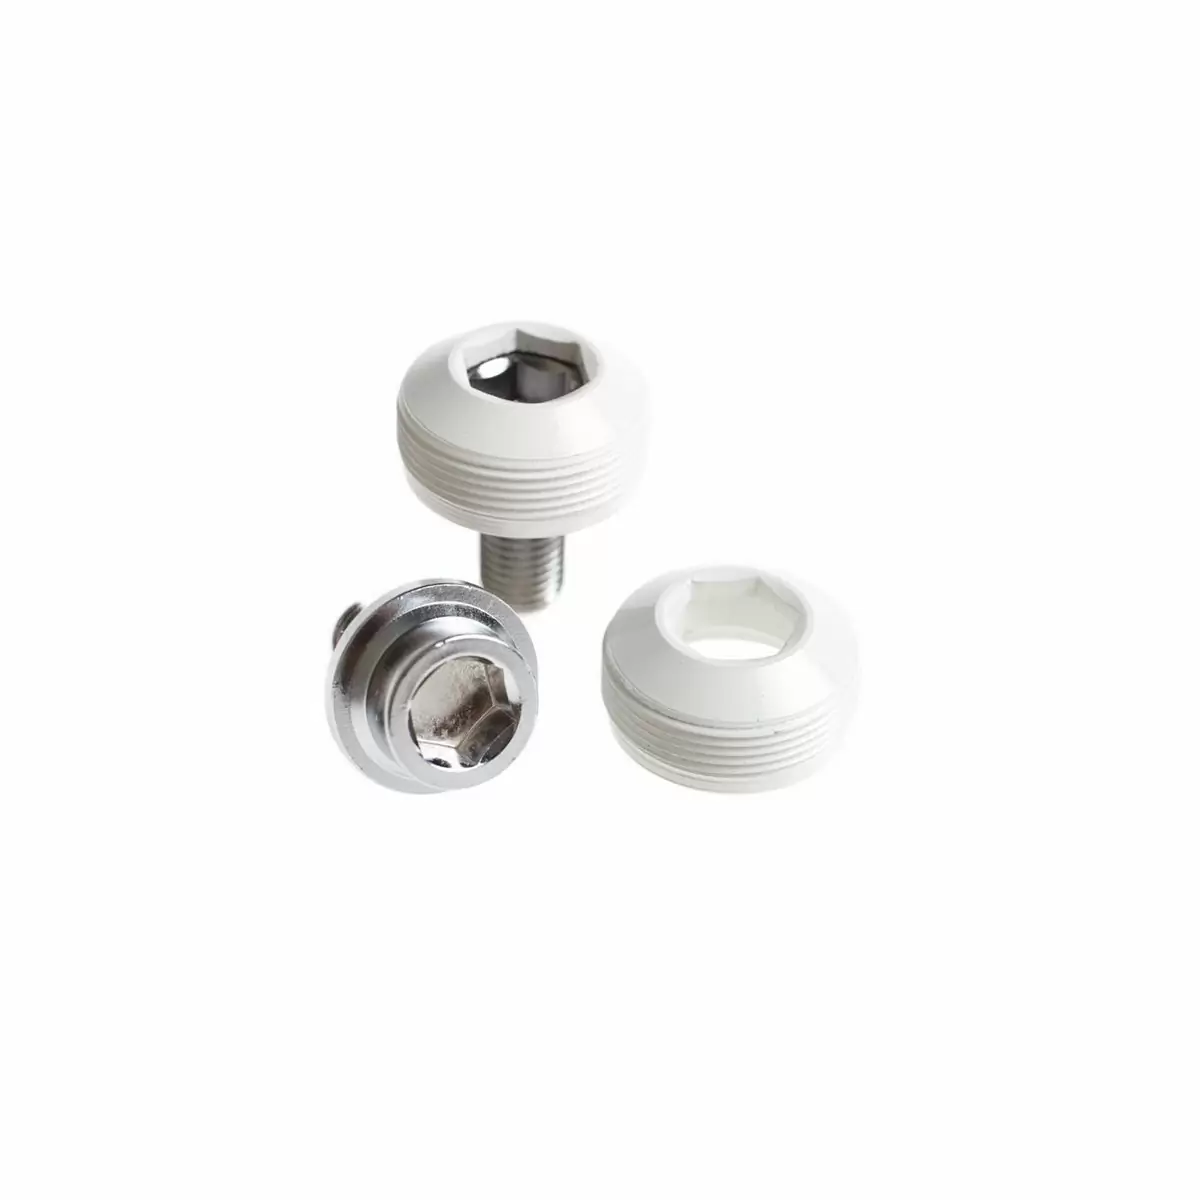 Alloy cup crank bolts with dust cover white - image